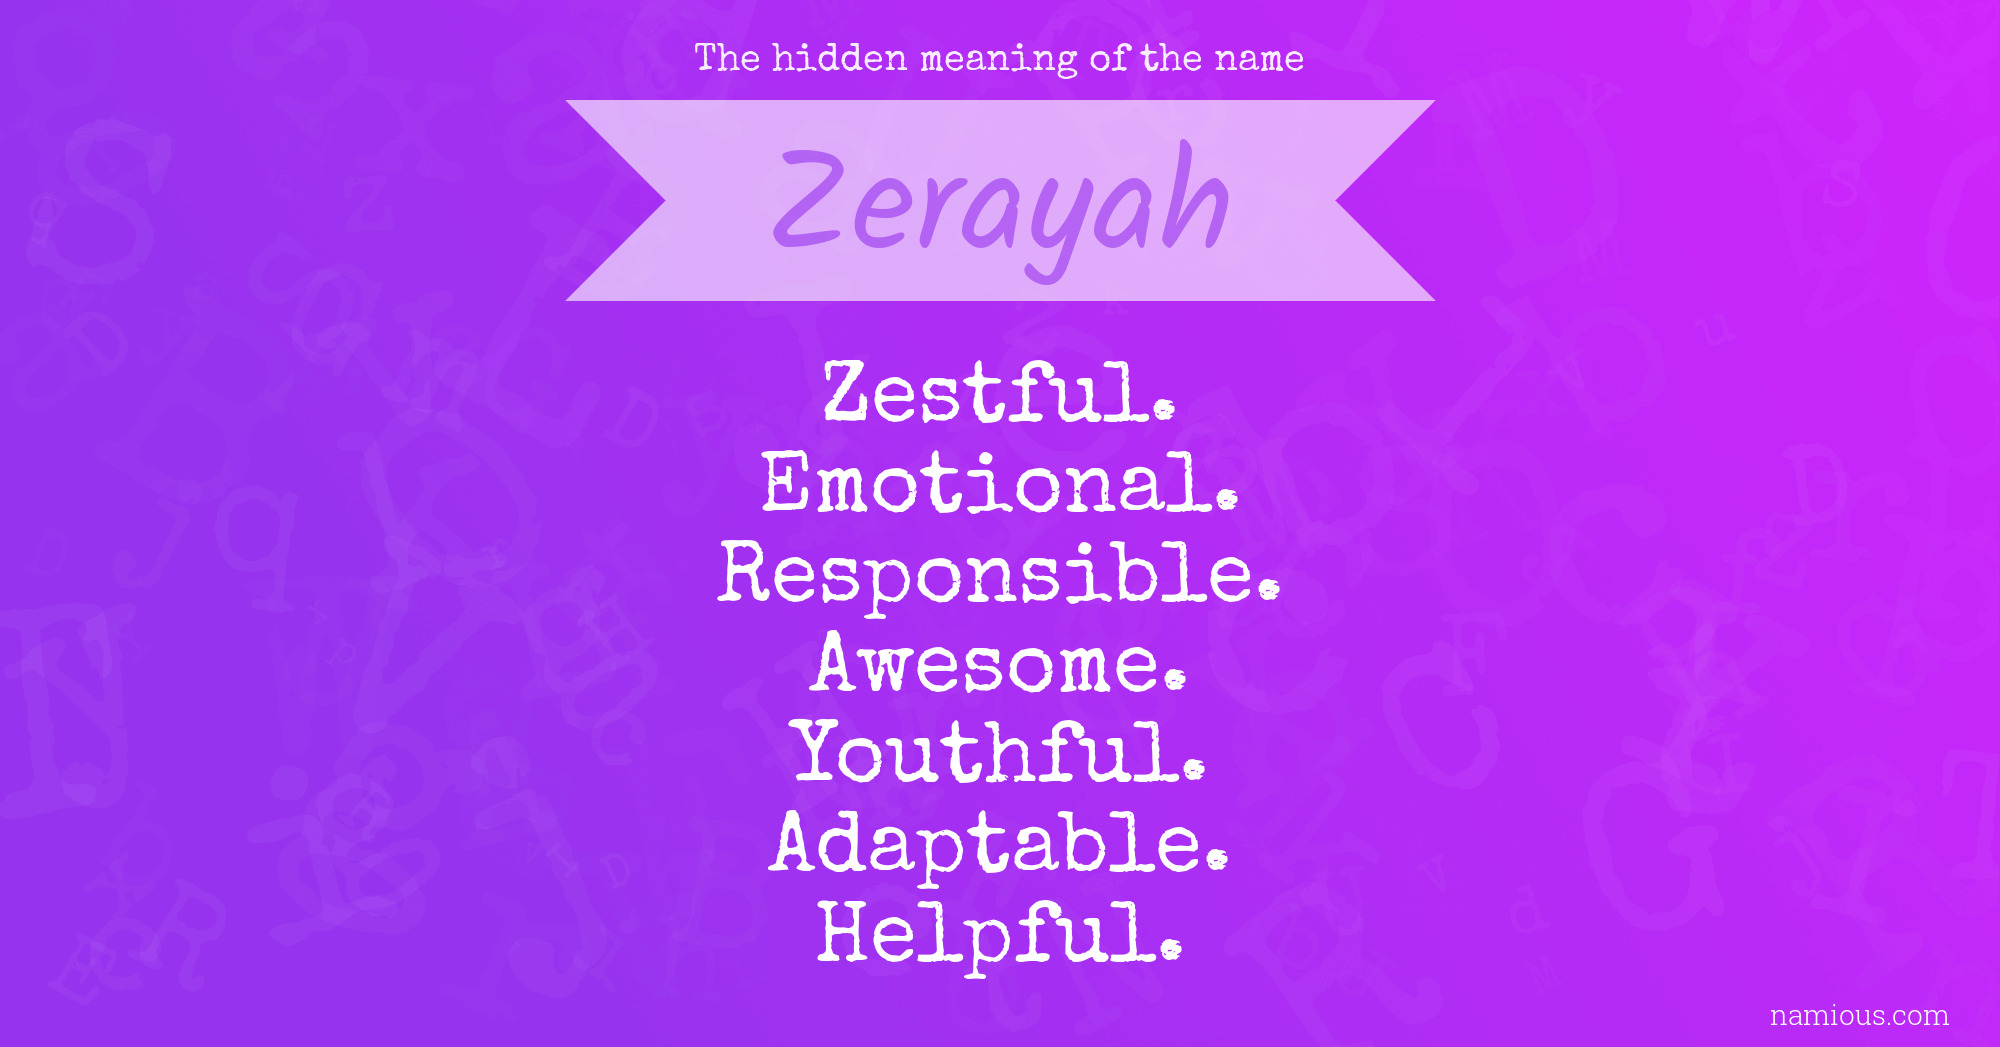 The hidden meaning of the name Zerayah